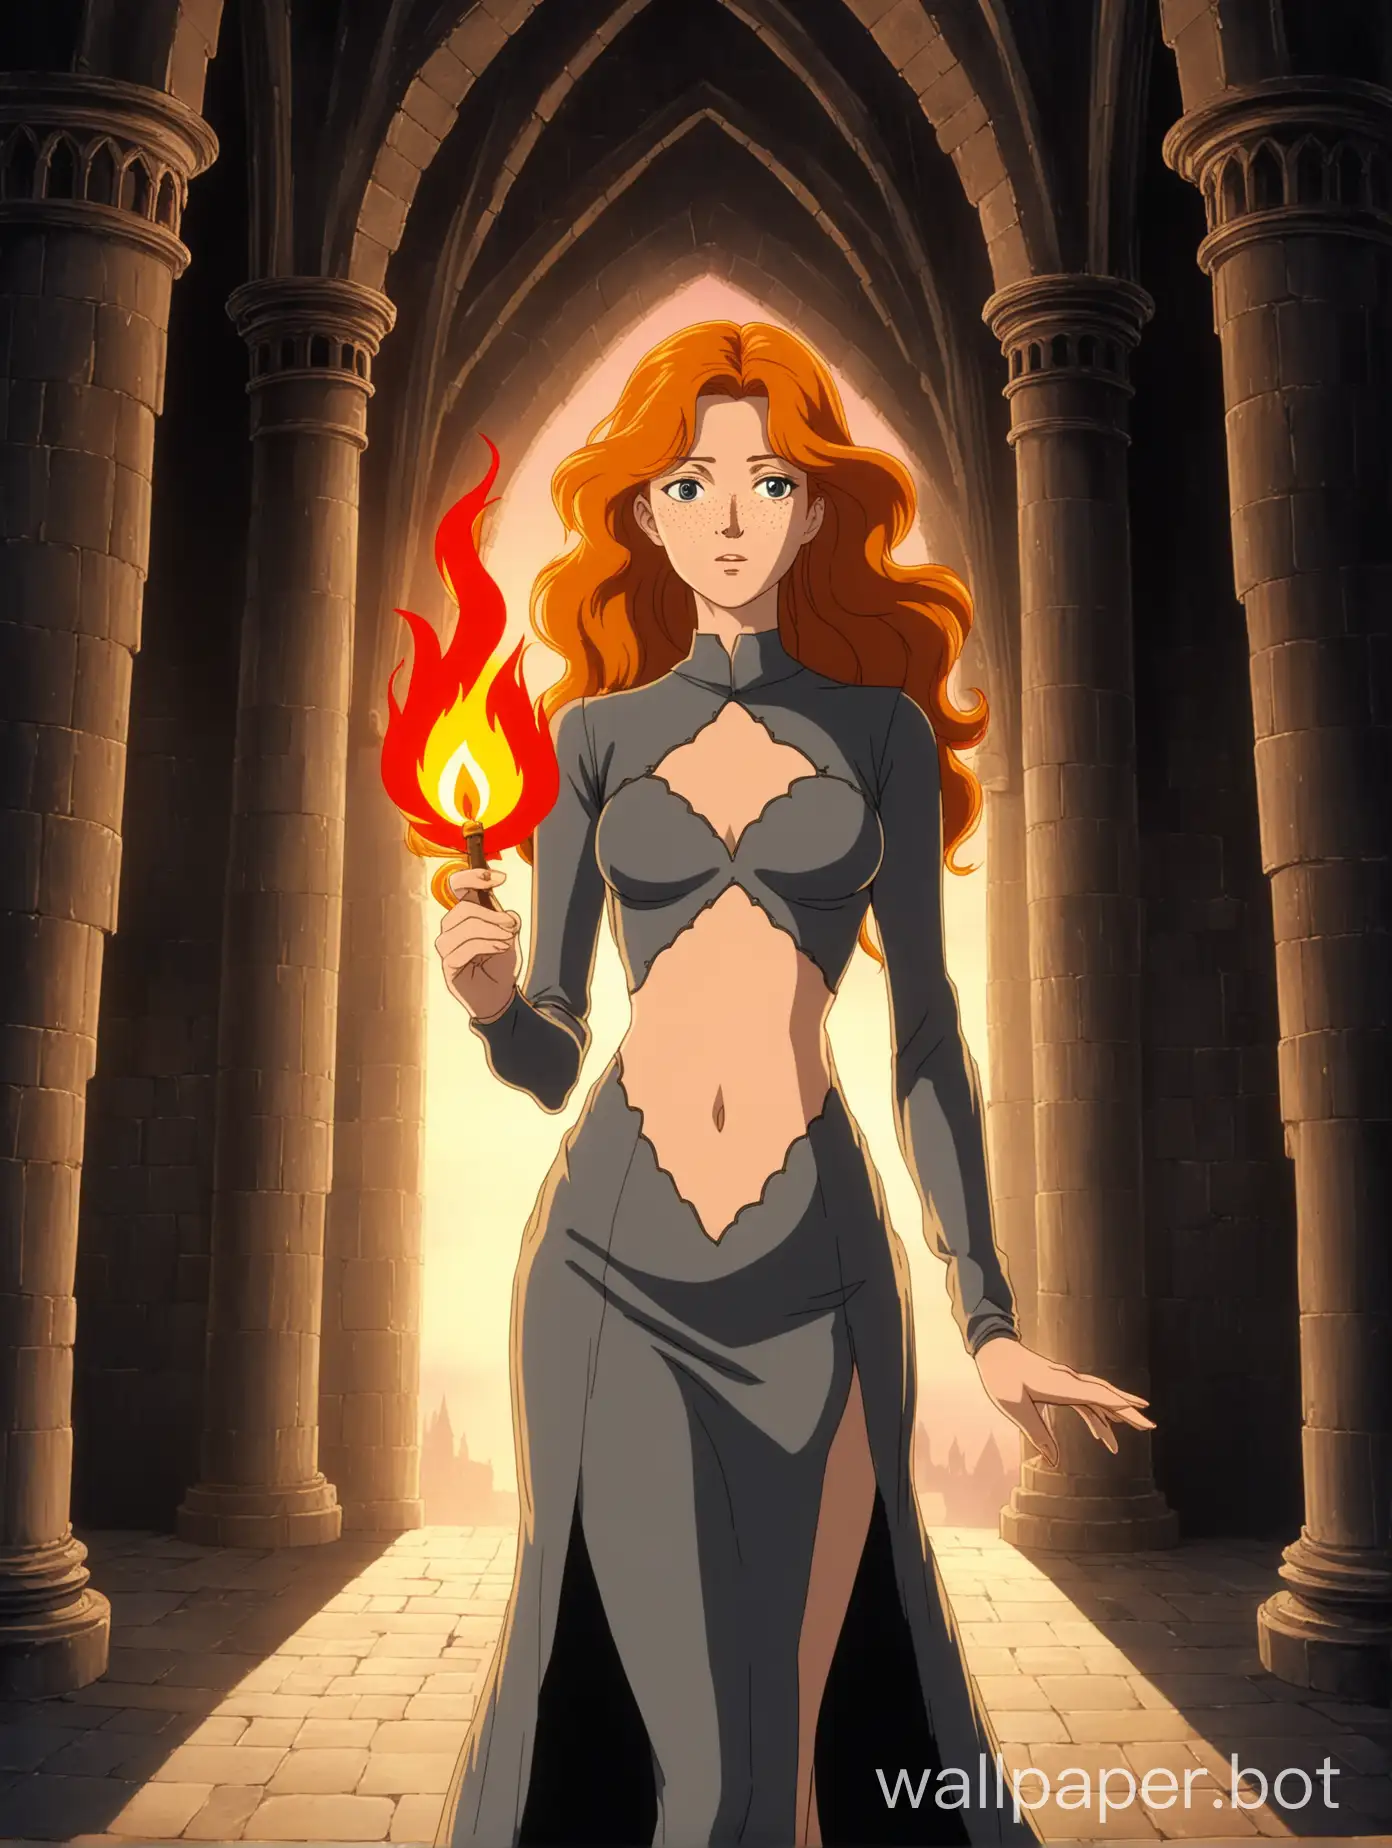 a young and attractive white woman, holding a flame in the palm of her hand, she has long wavy orange hair, standing regally, holding flame in one hand, elegant and slender, sharp face, lots of freckles, dignified and confident, amazed expression, wearing a sheer thin dark grey skintight dress, large diamond-shaped stomach cutout, midriff, she is thin and slender, ornate stitching, medieval elegance, castle interior, 1980s retro anime, vibrant colors, golden hour lighting